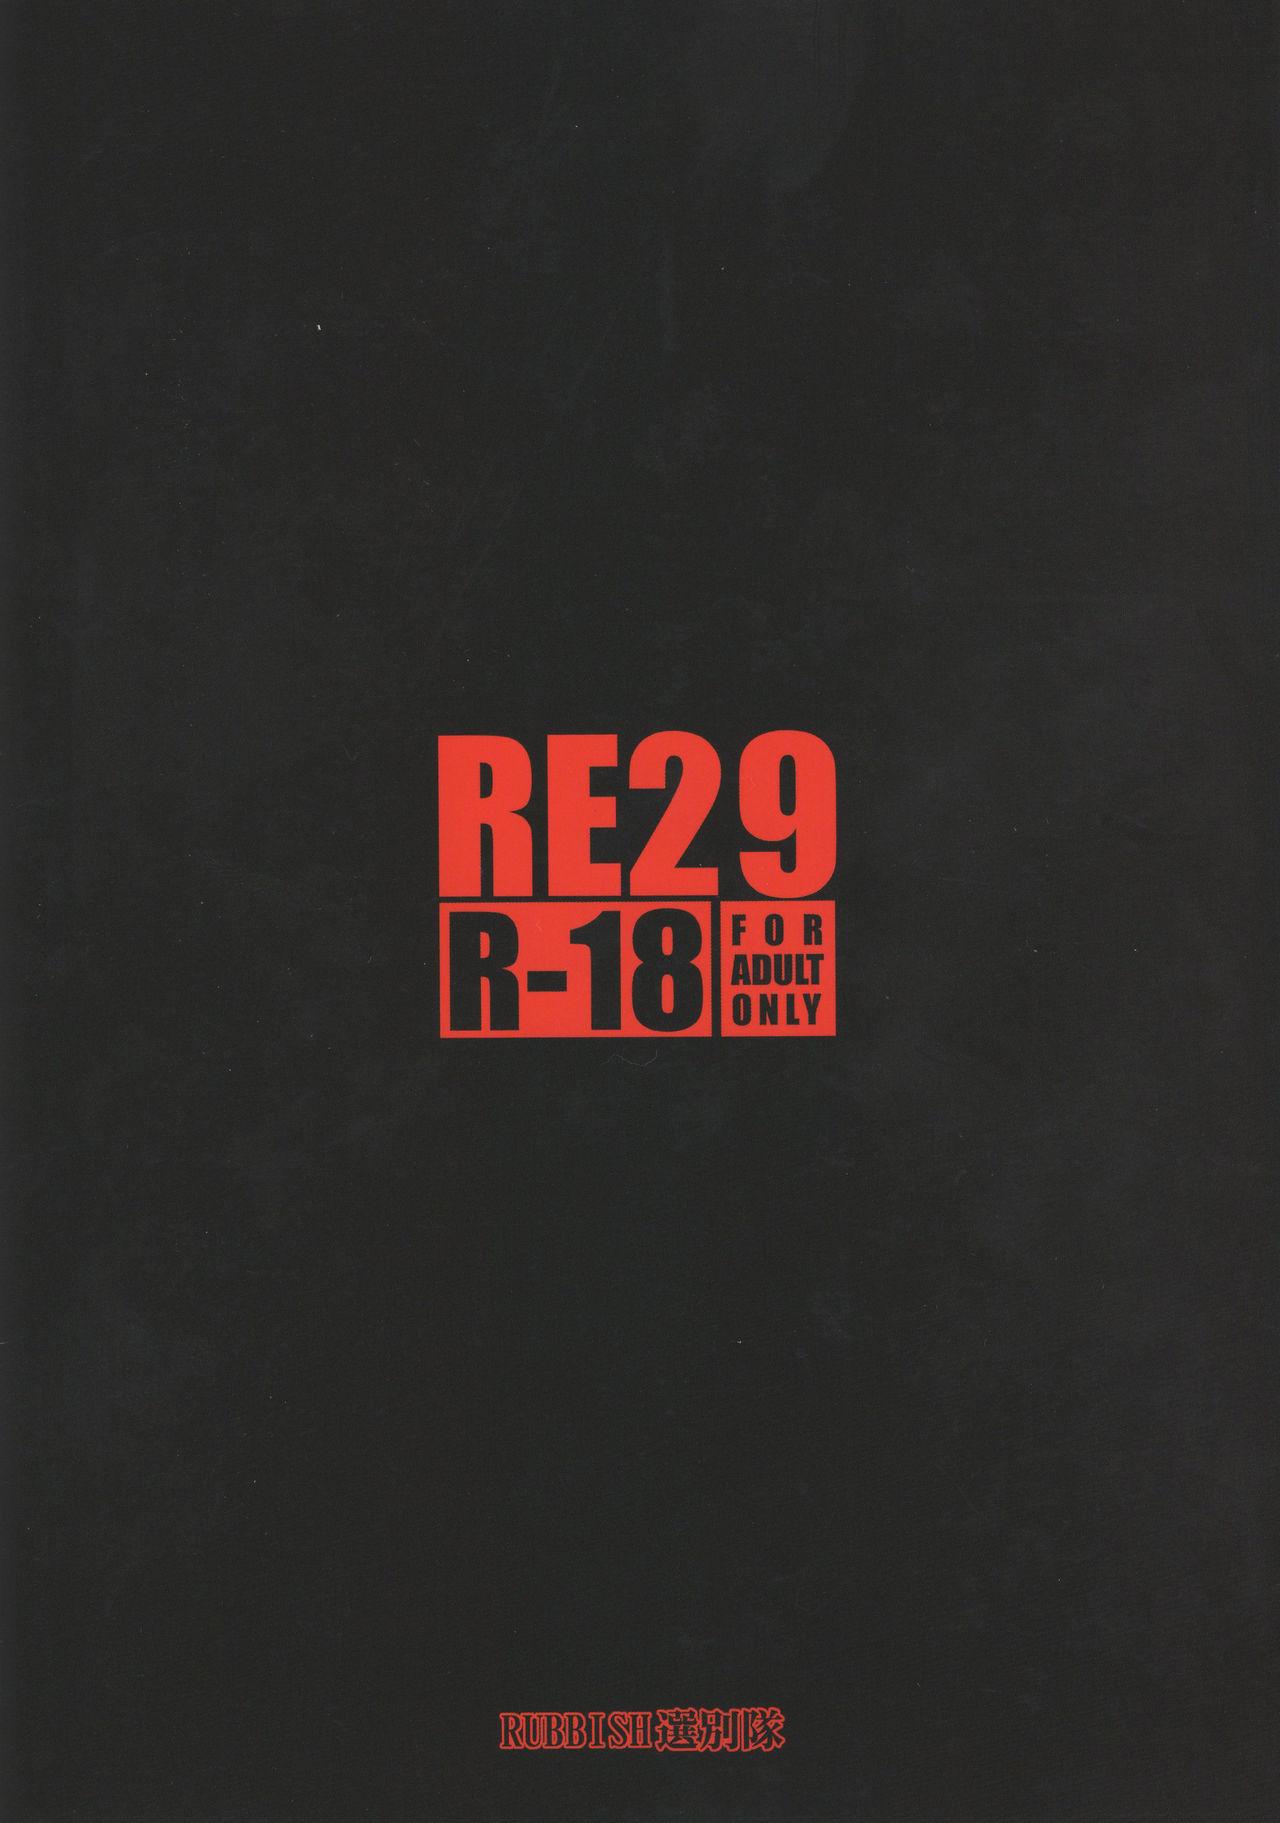 RE29 33